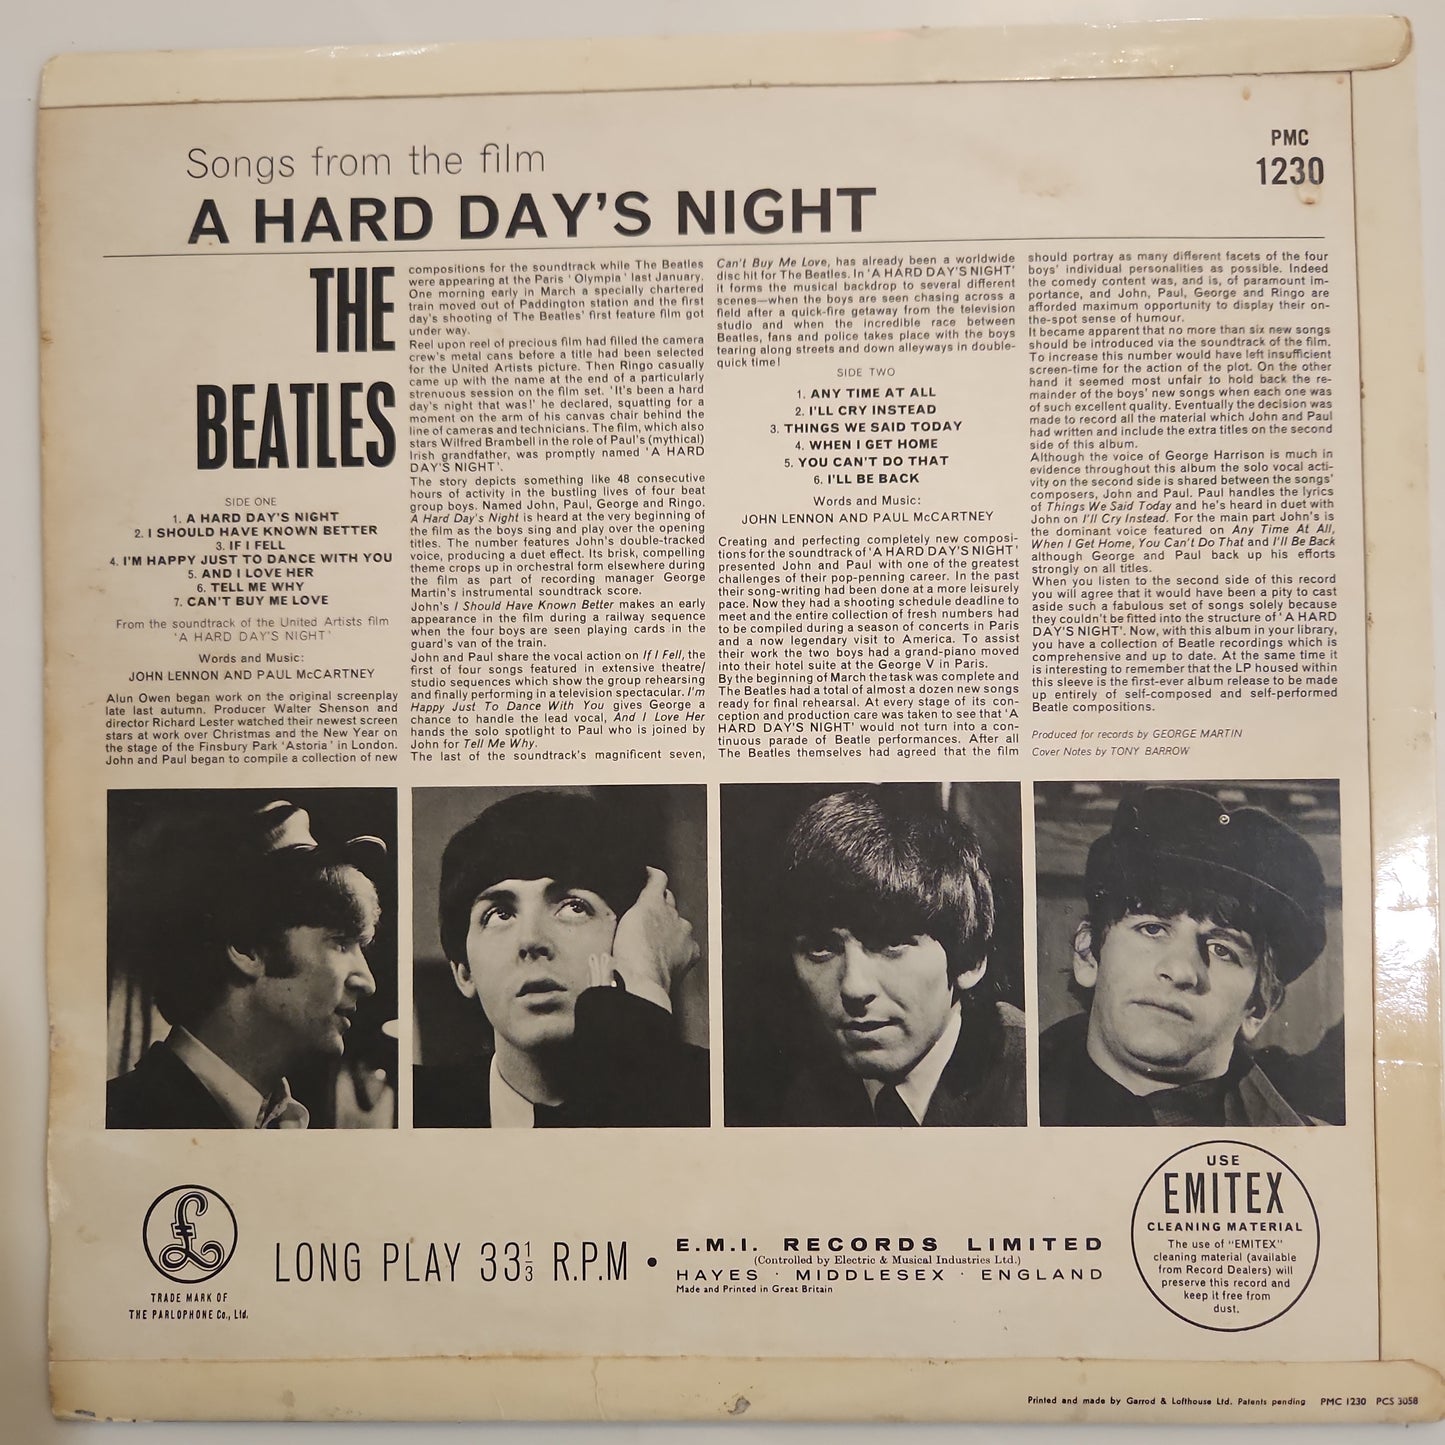 The Beatles - A Hard Day's Night (F92)